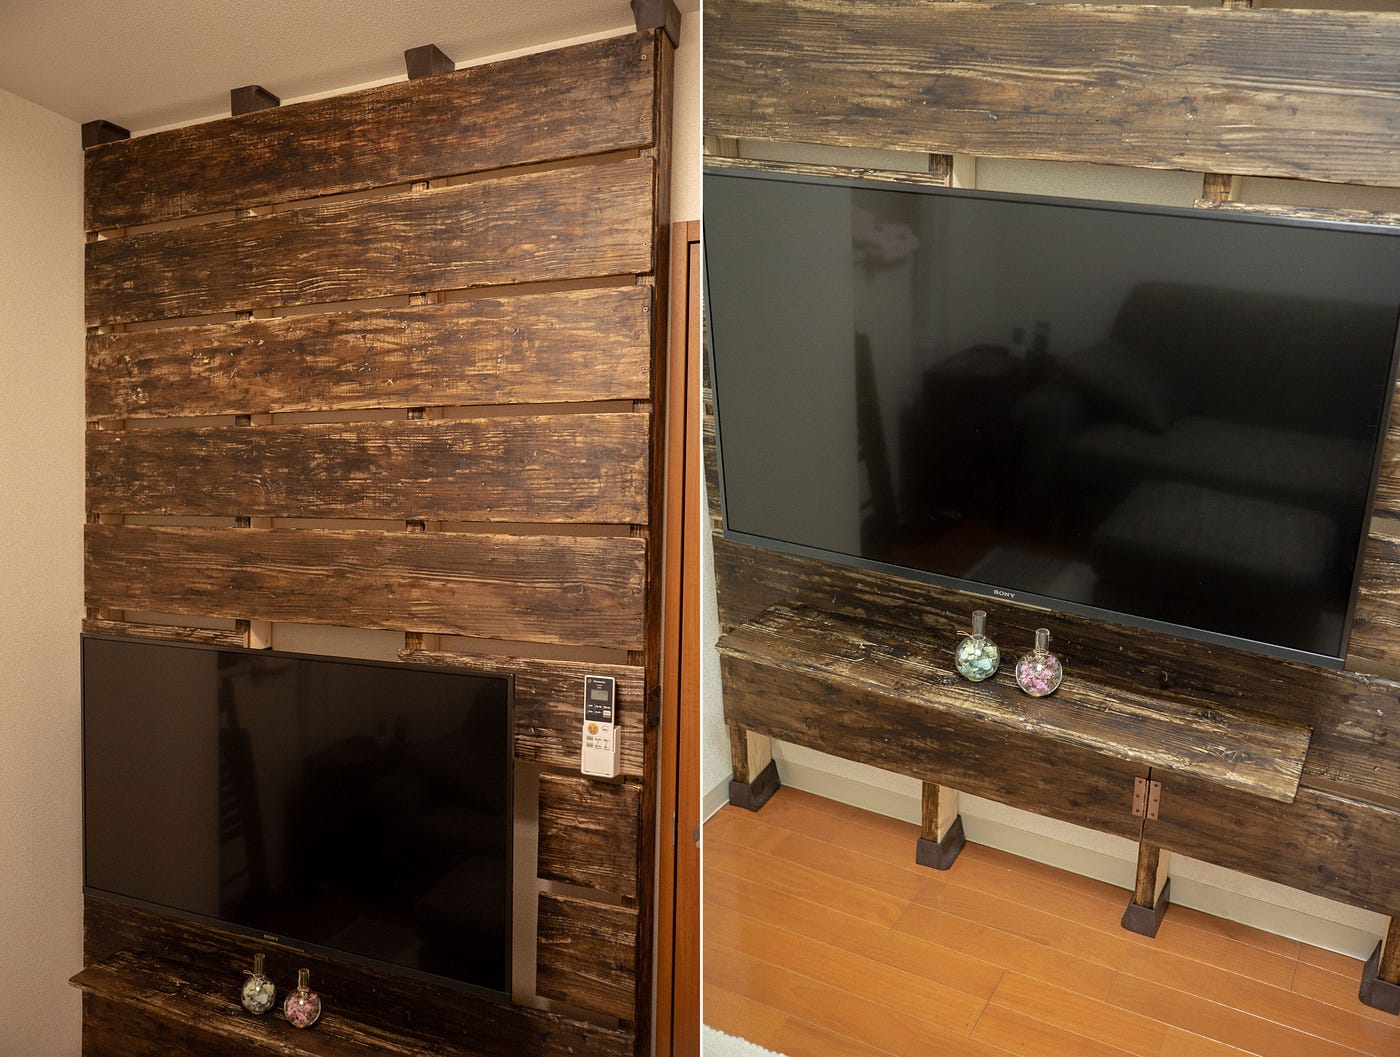 Diy Tv Mount Wall - Build Tv Furniture Tips : Others merely hold the tv